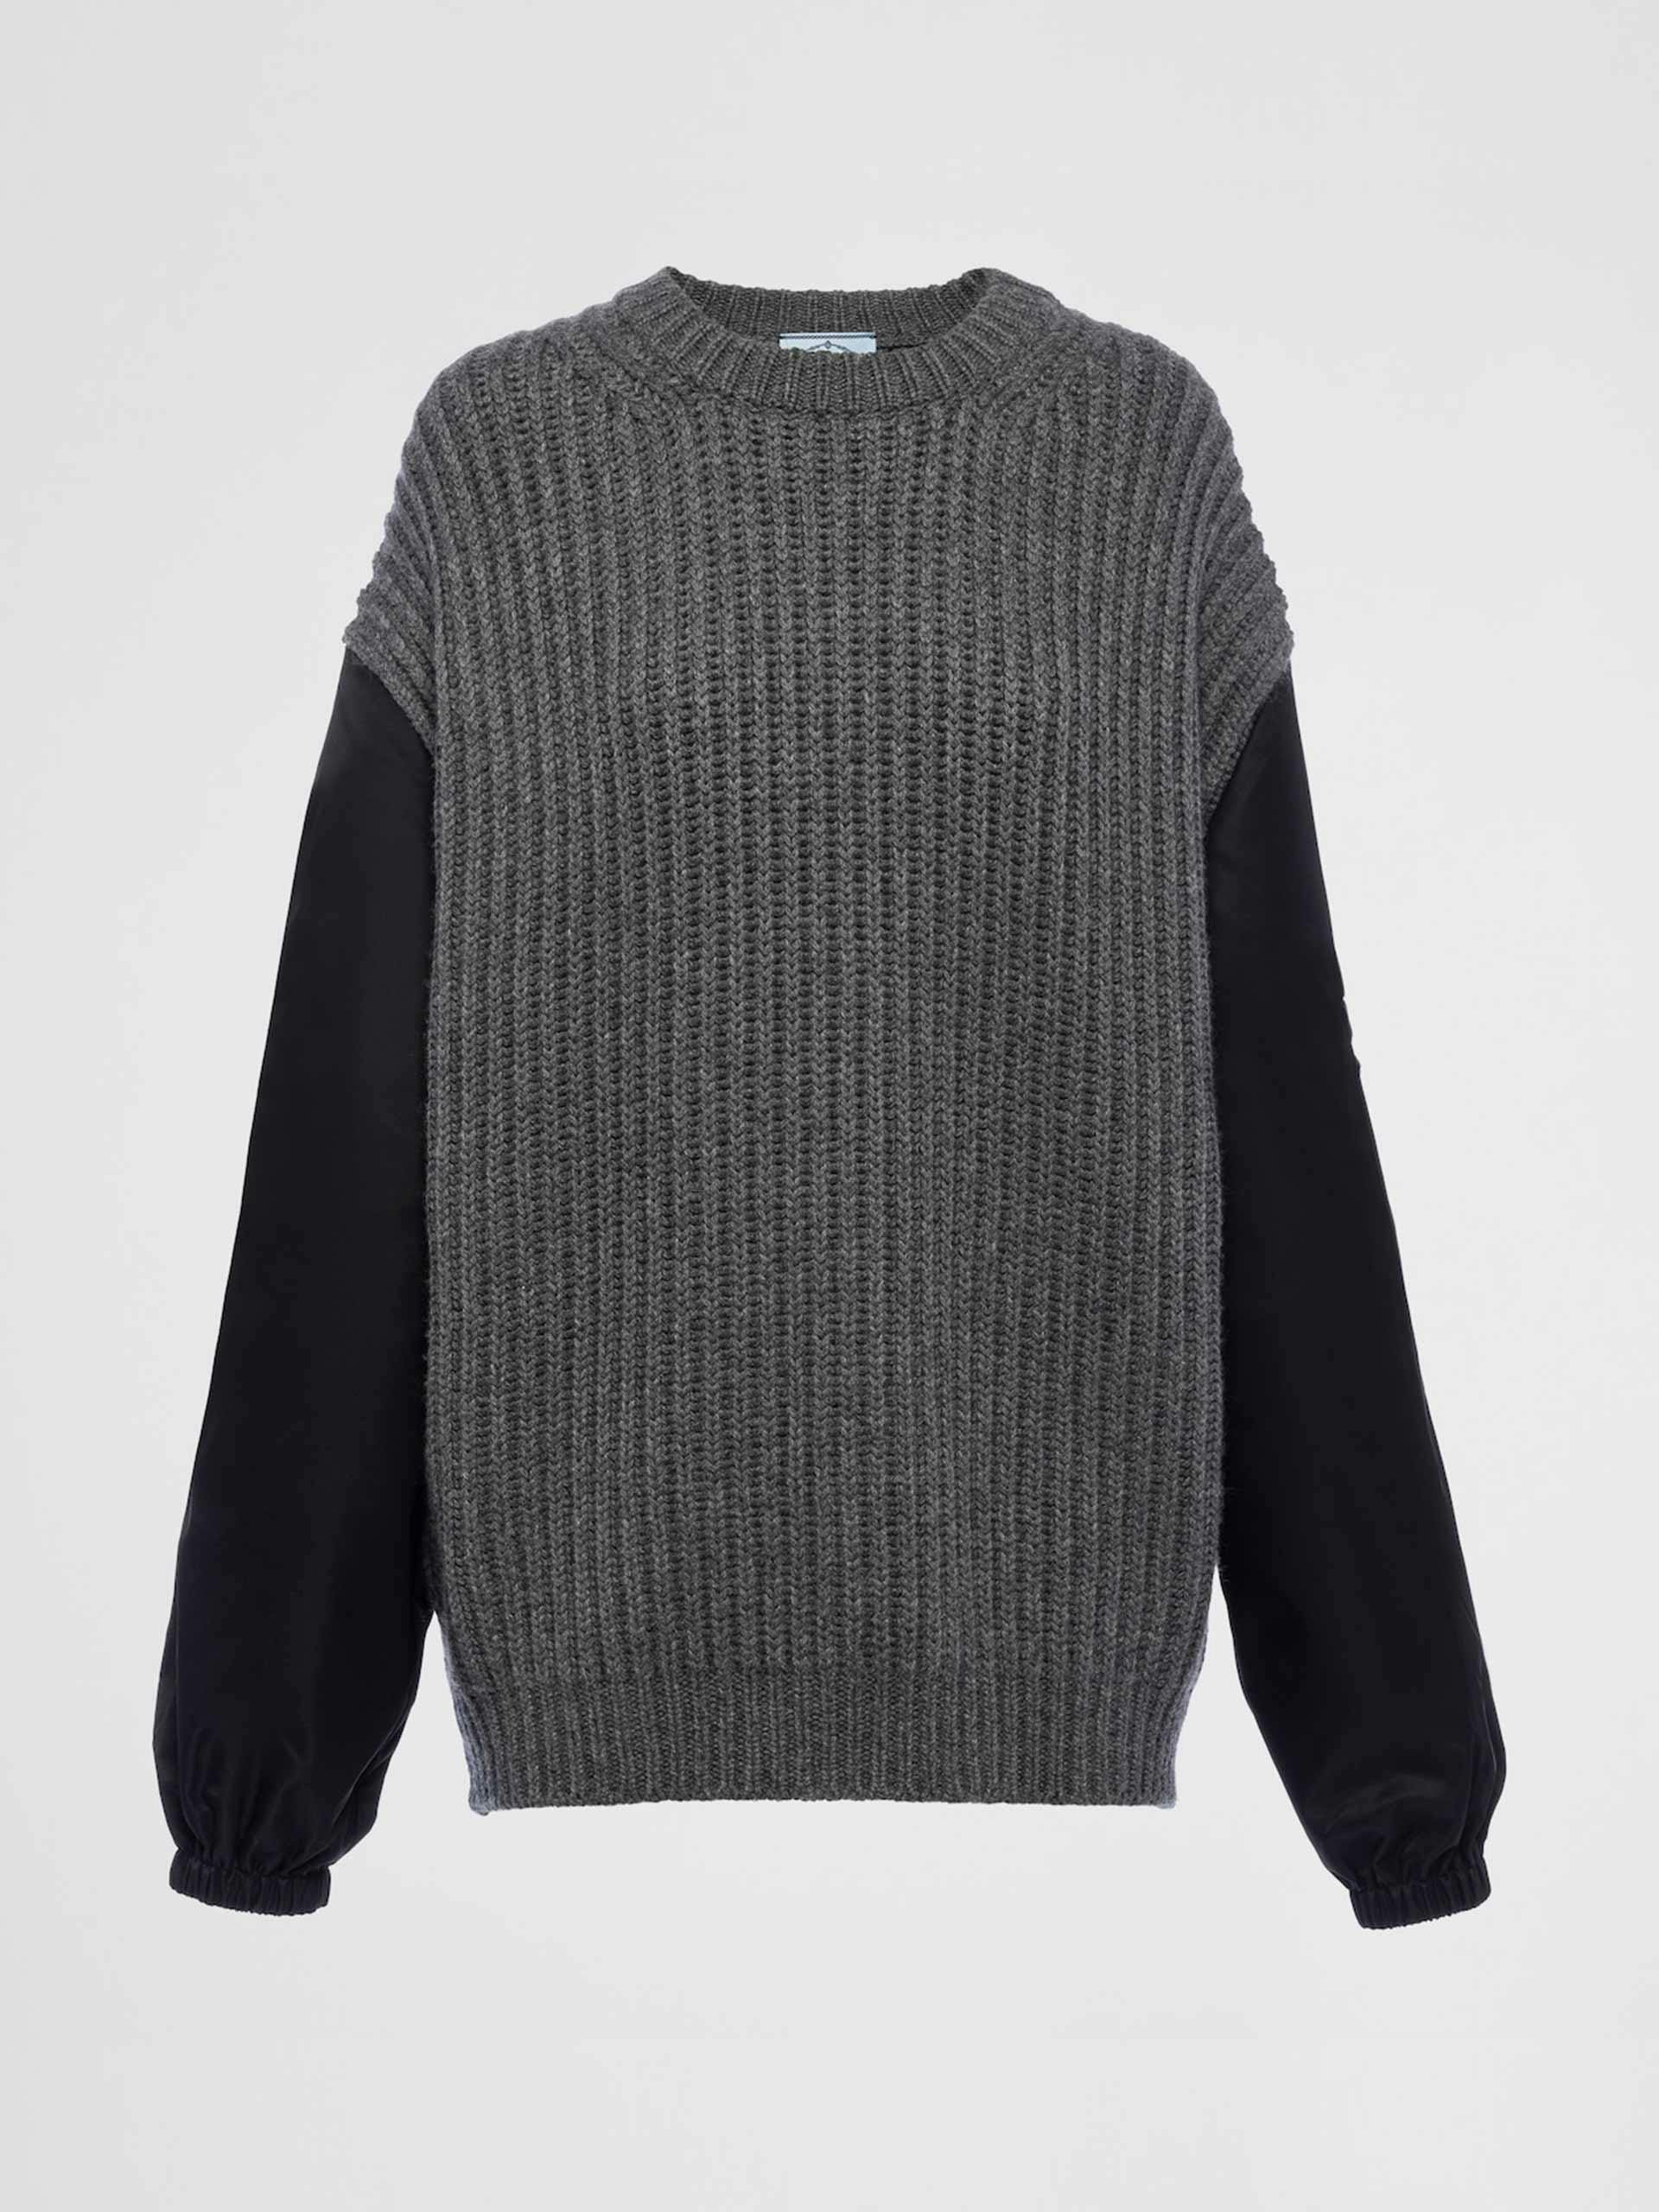 Cashmere, wool and Re-Nylon sweater